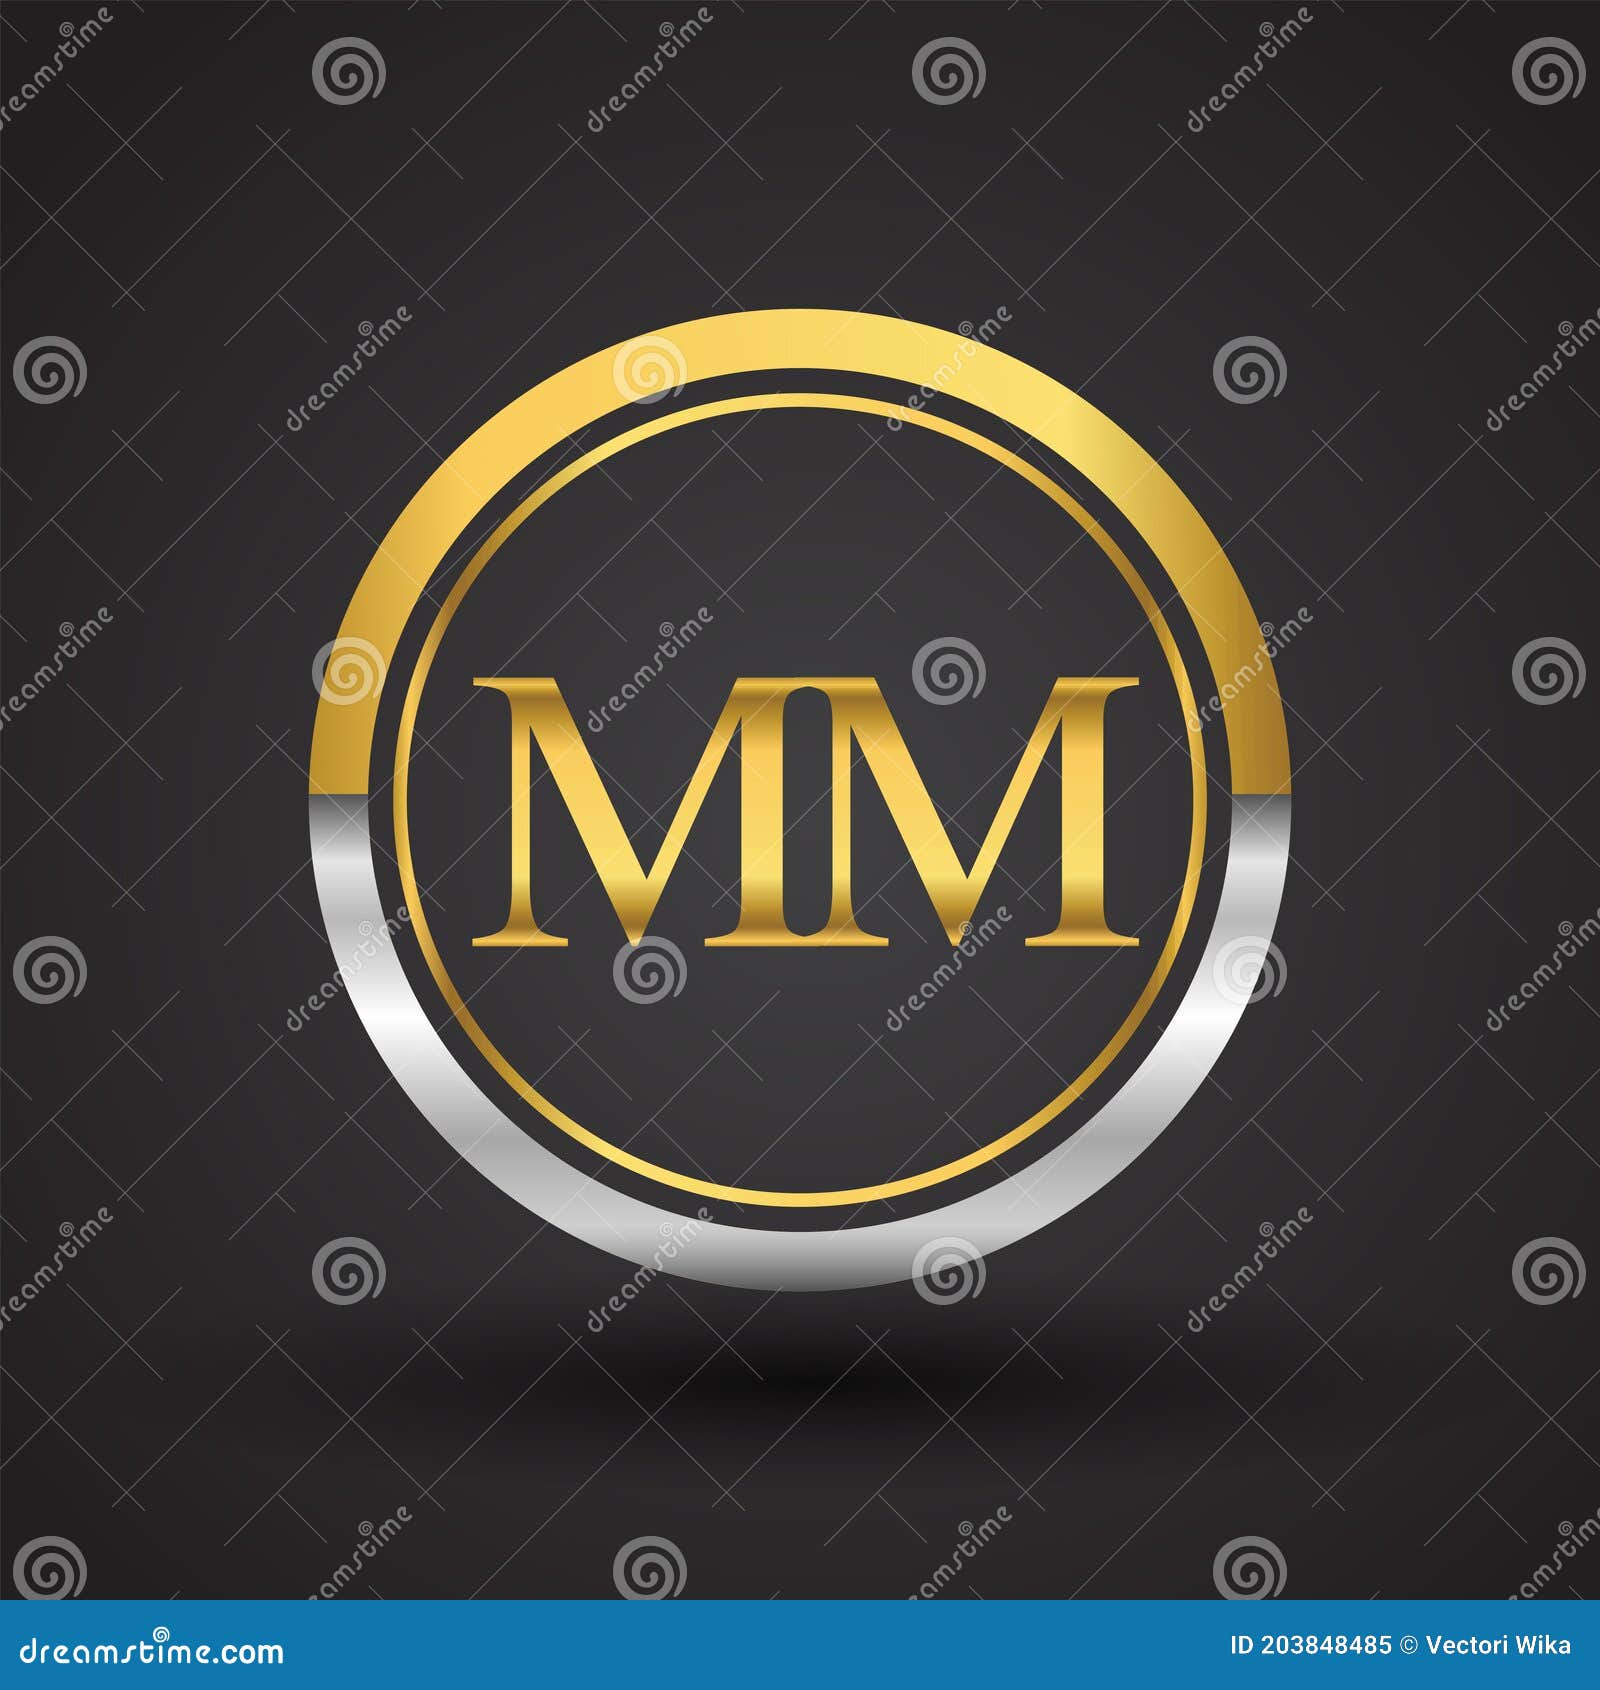 MM Letter Logo in a Circle, Gold and Silver Colored. Vector Design